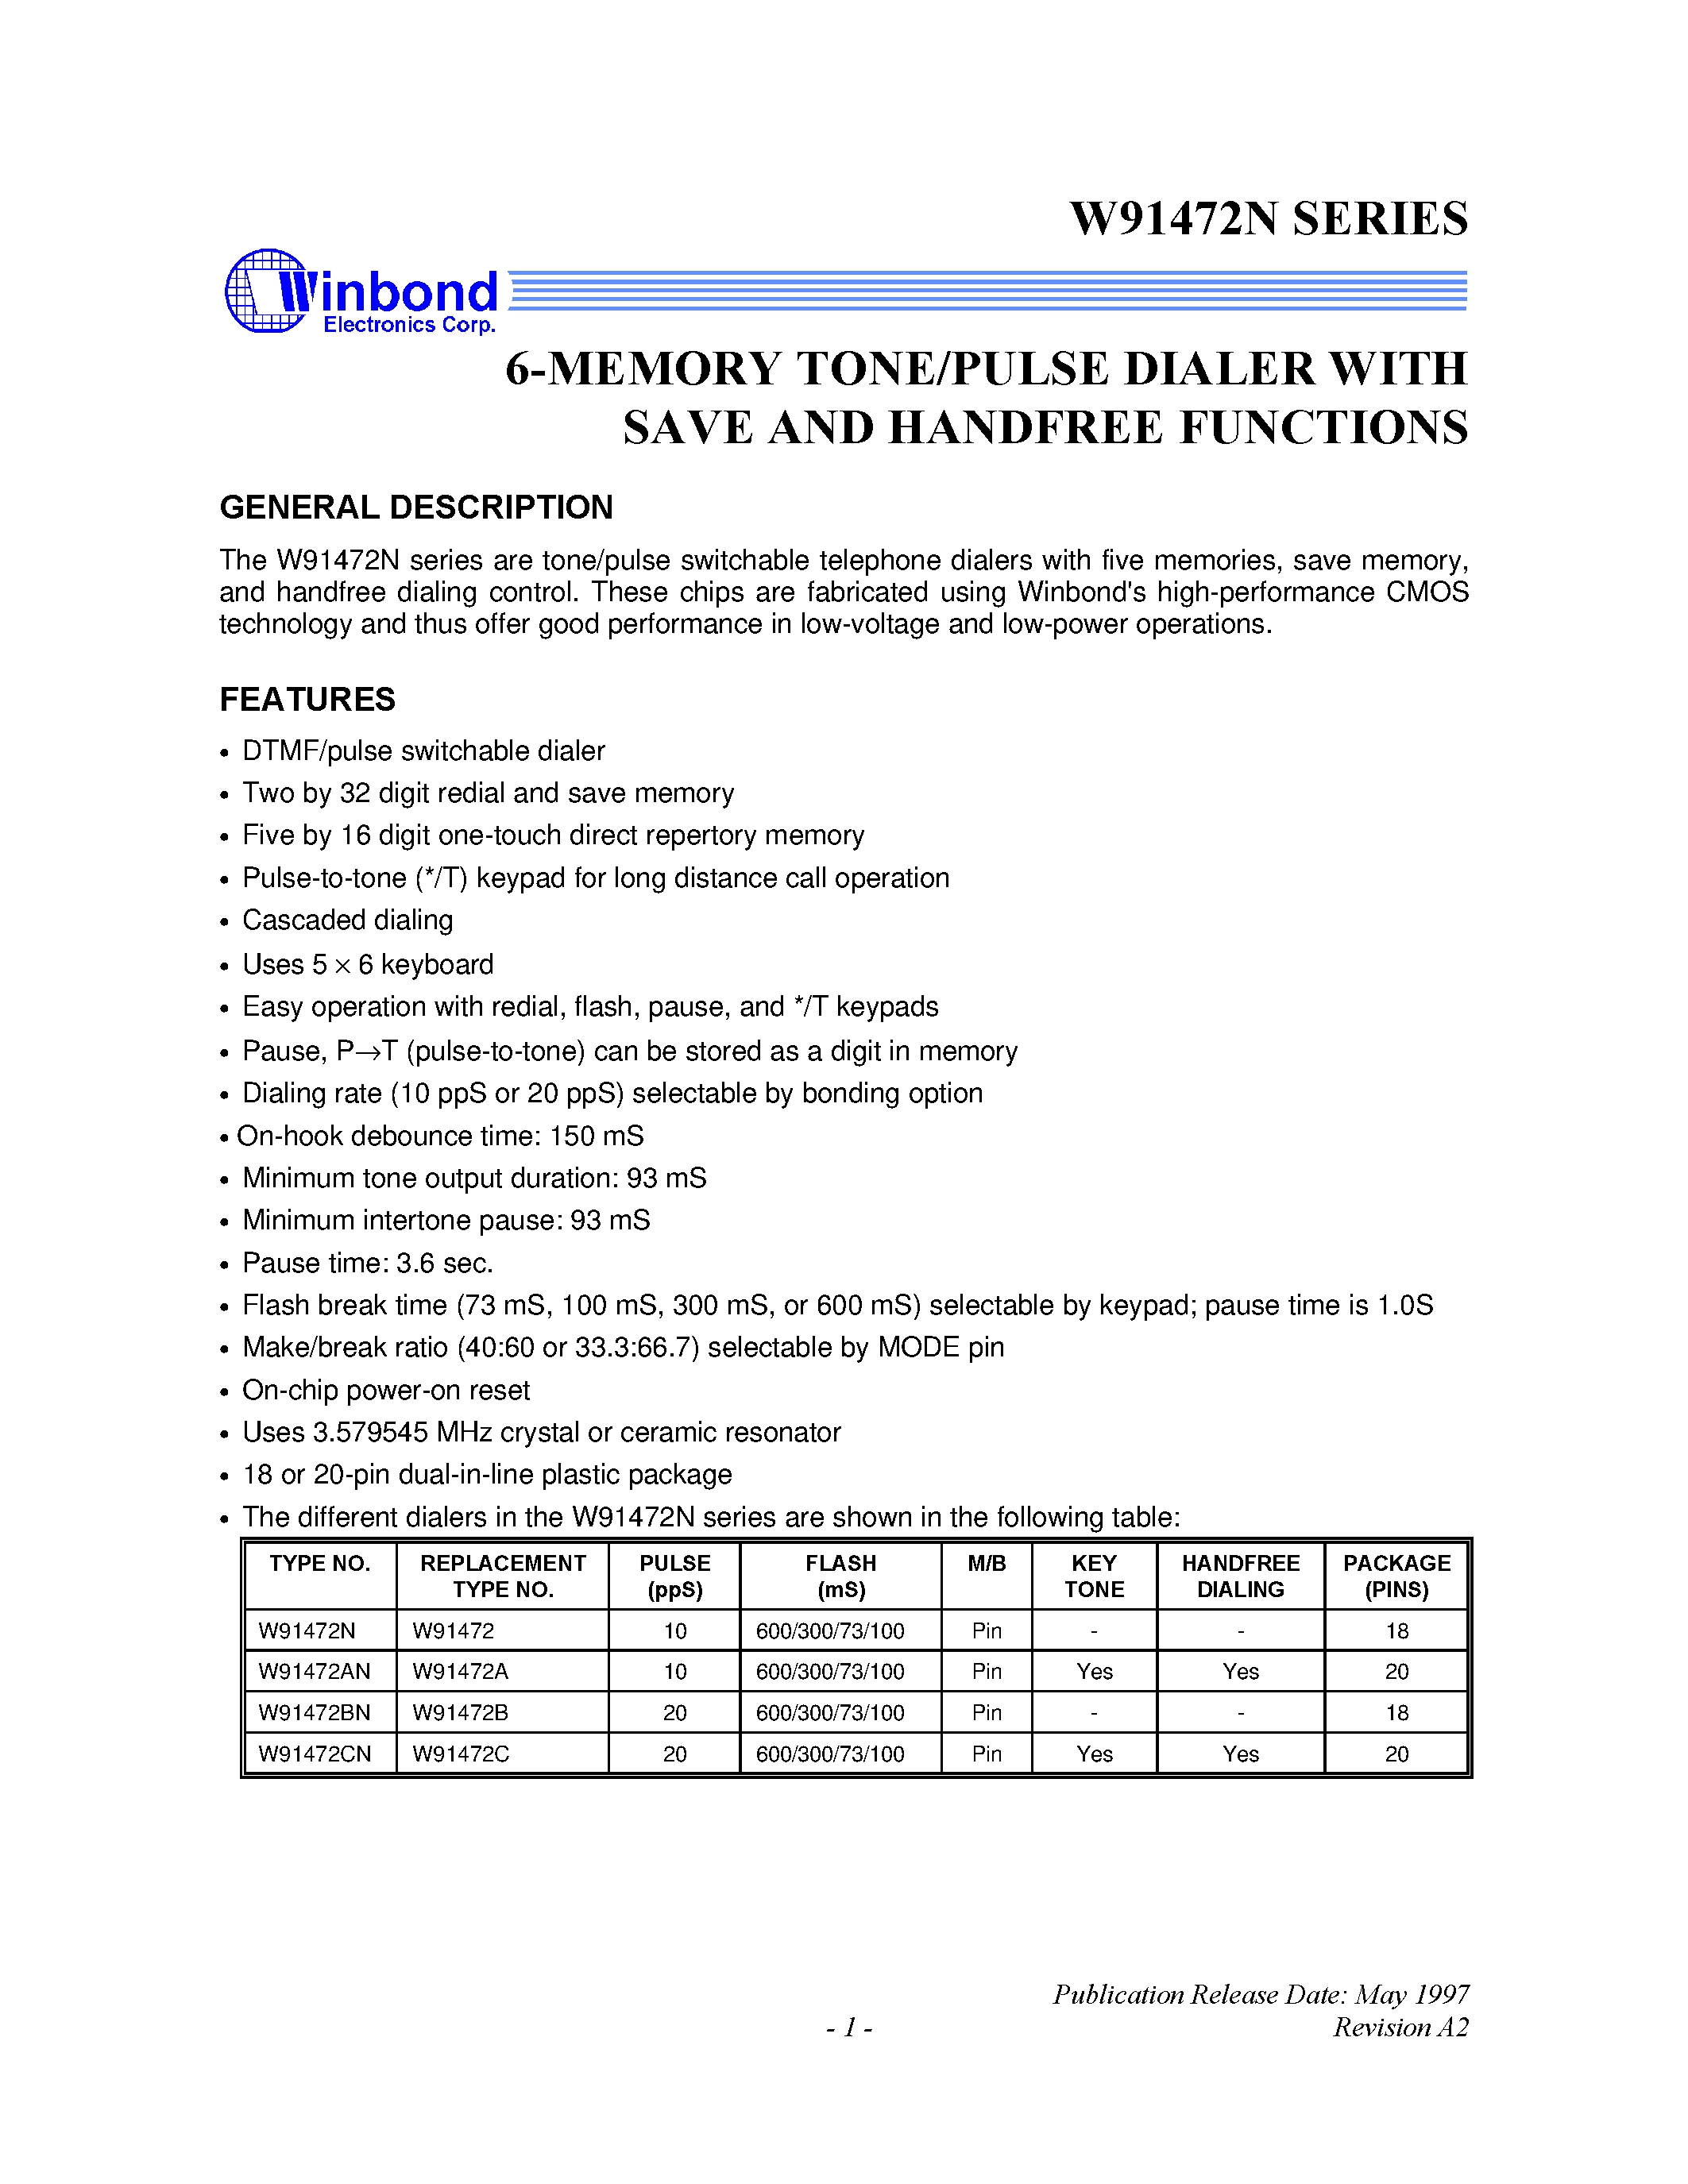 Datasheet W91472BN - 6-MEMORY TONE/PULSE DIALER WITH SAVE AND HANDFREE FUNCTION page 1